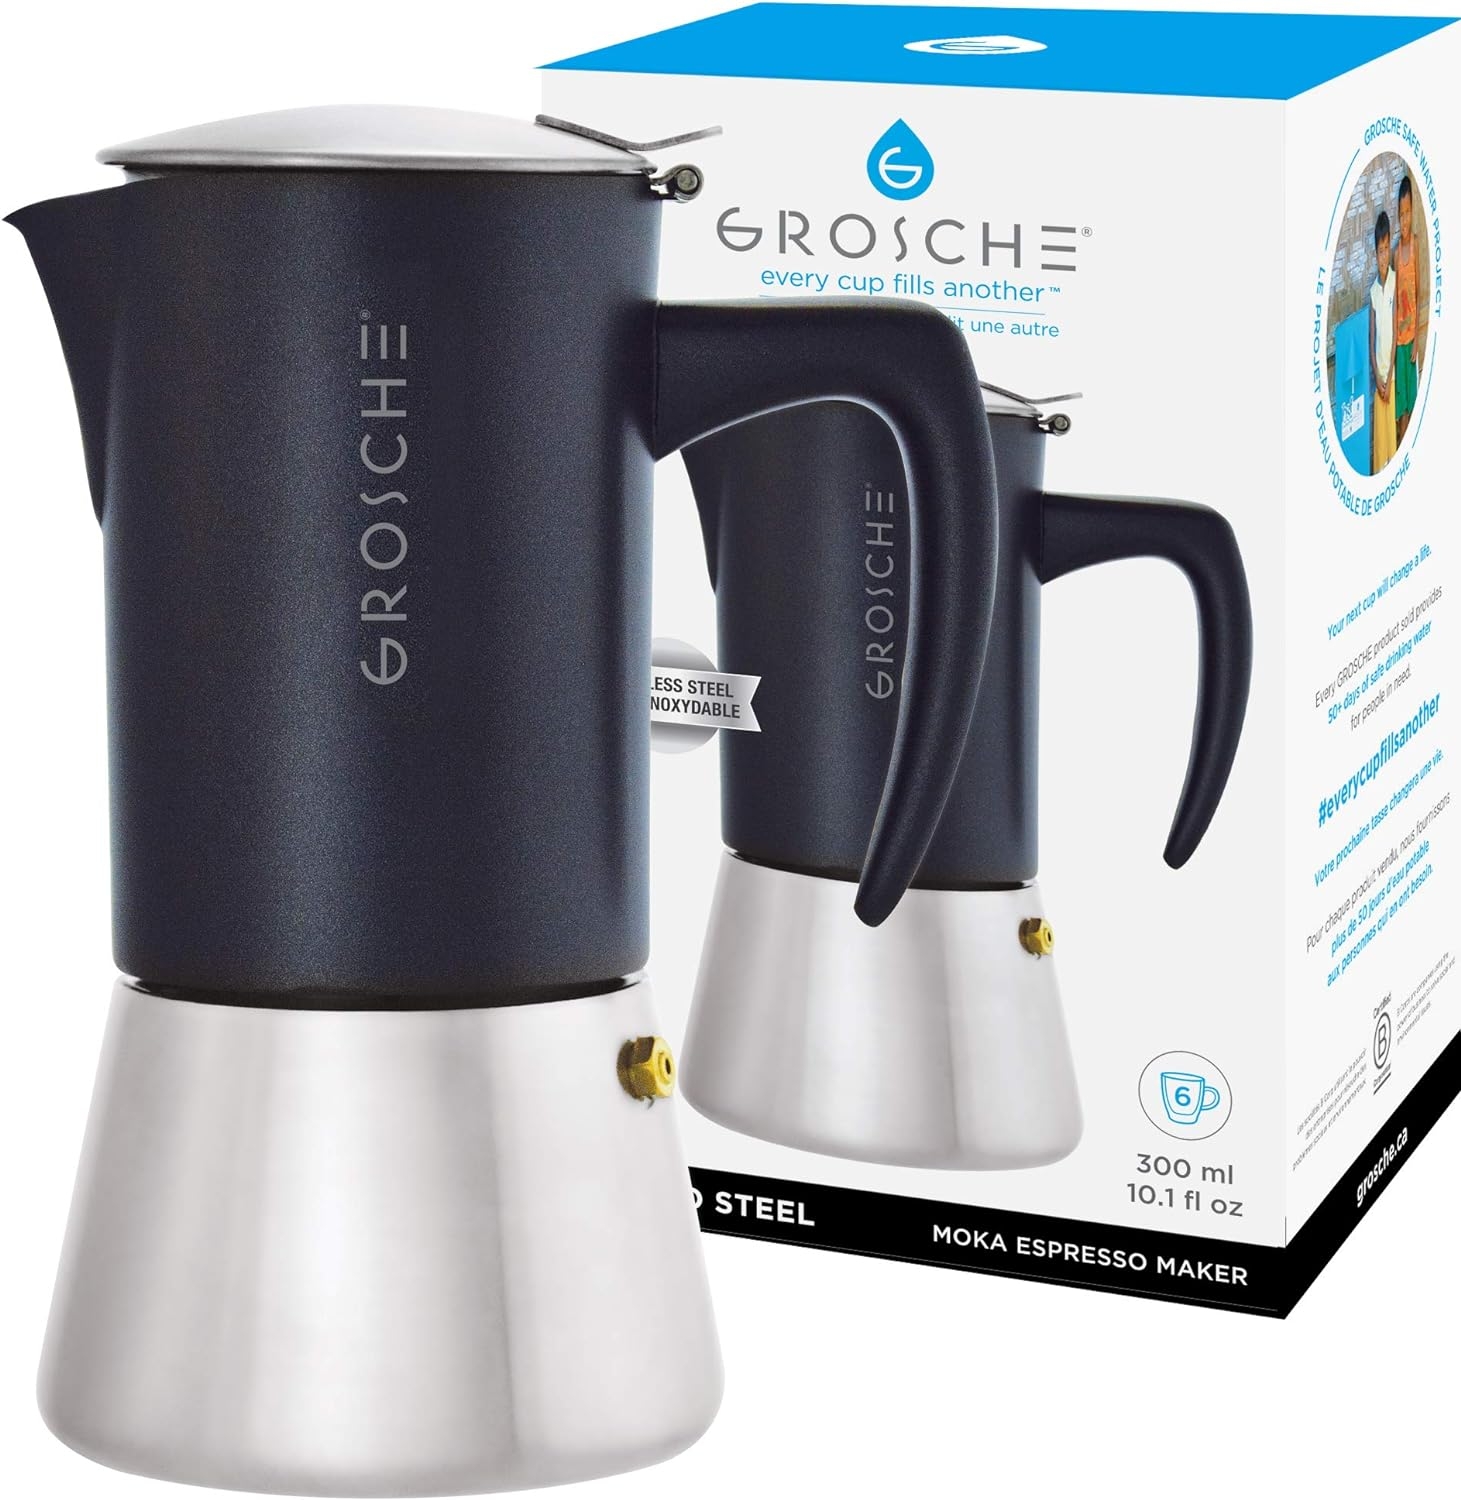 GROSCHE Milano Steel 6 espresso cup Stainless Steel Stovetop Espresso Maker Moka pot - Cuban Coffee maker Italian Espresso Greca coffee maker for Induction gas or electric stoves